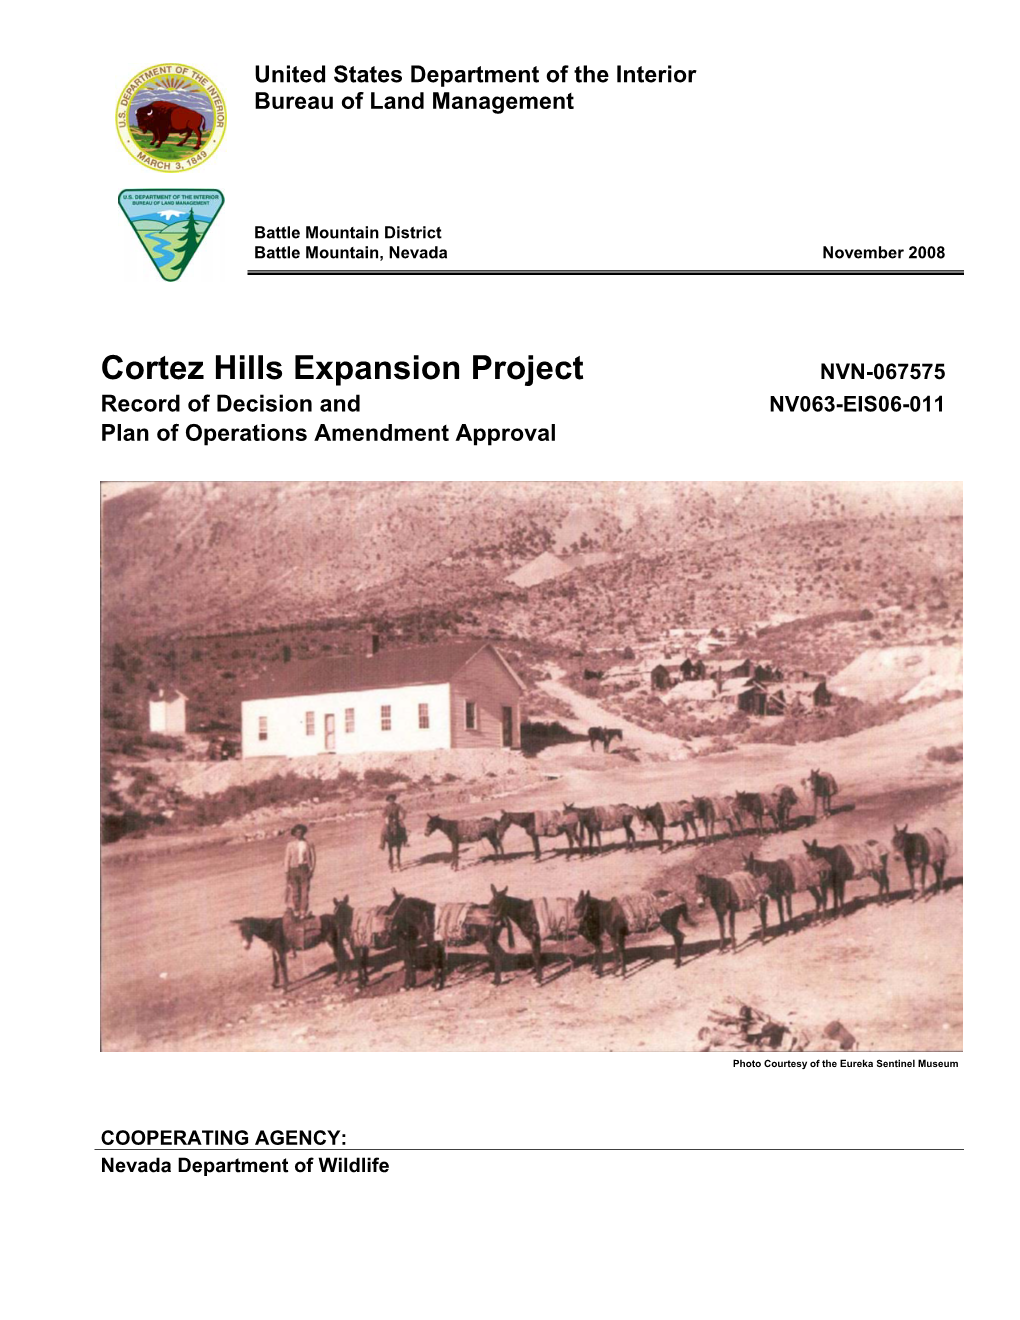 Cortez Hills Expansion Project NVN-067575 Record of Decision and NV063-EIS06-011 Plan of Operations Amendment Approval